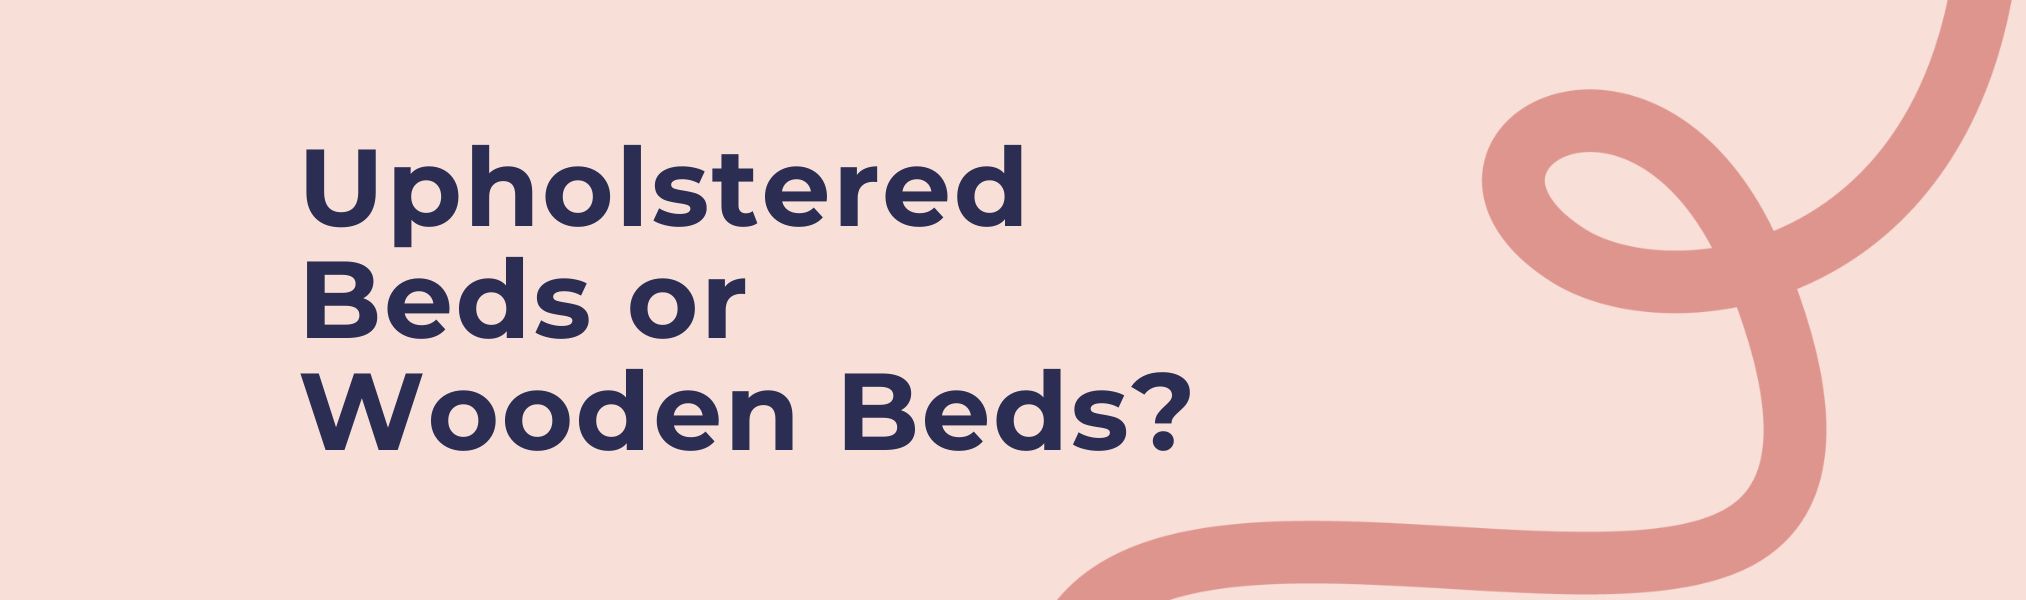 Which Bed is Best: An Upholstered Bed or a Wooden Bed?